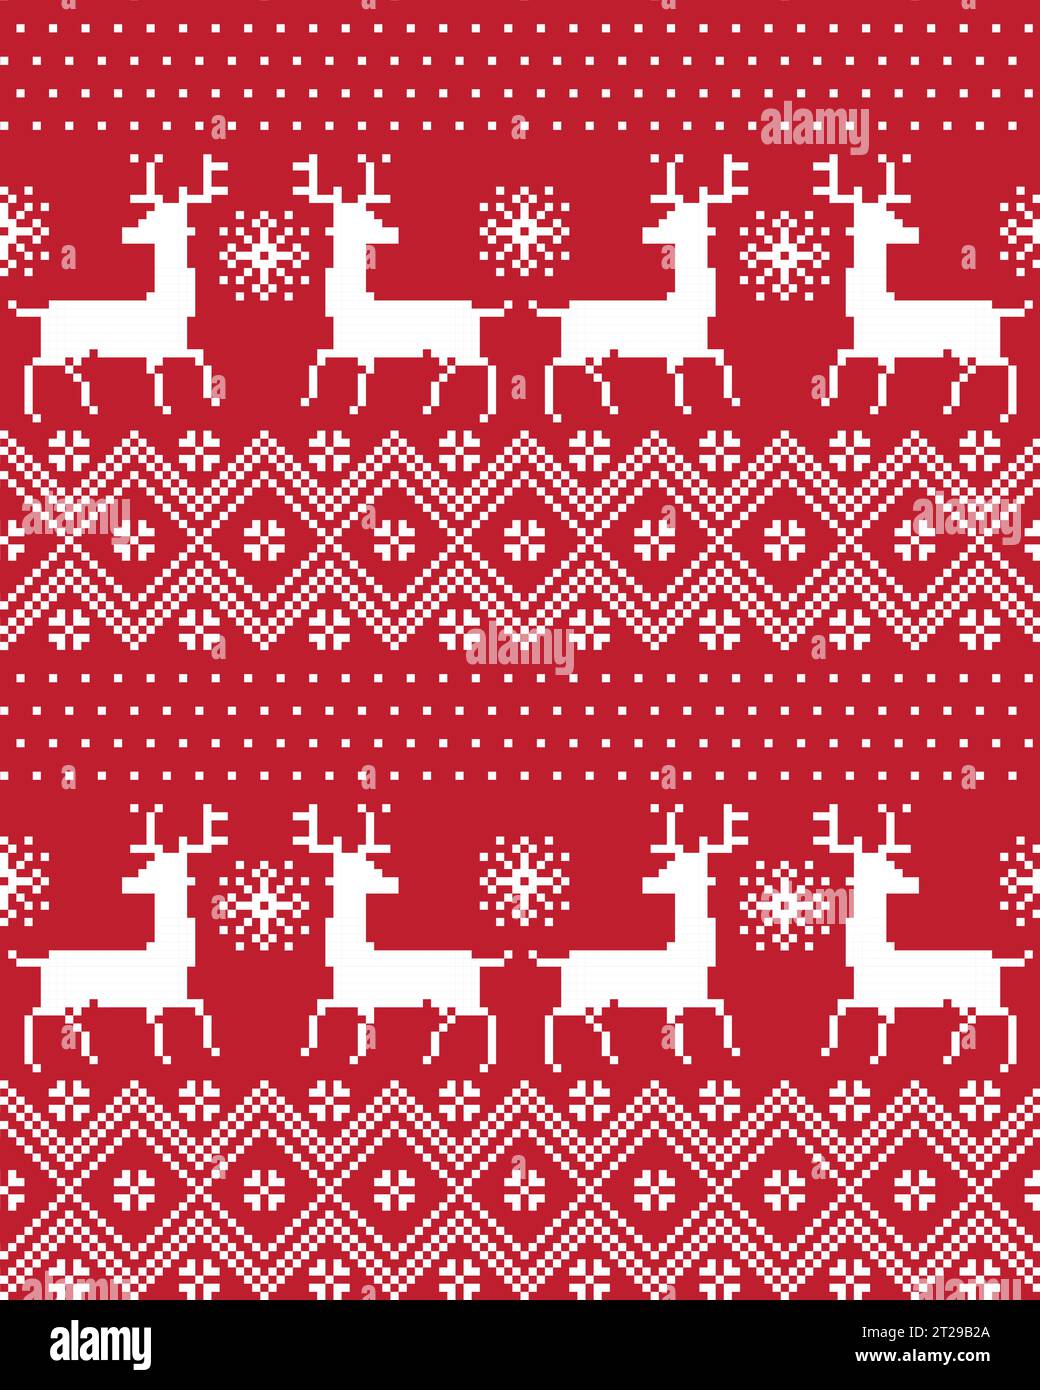 New Year's Christmas pattern pixel Stock Vector